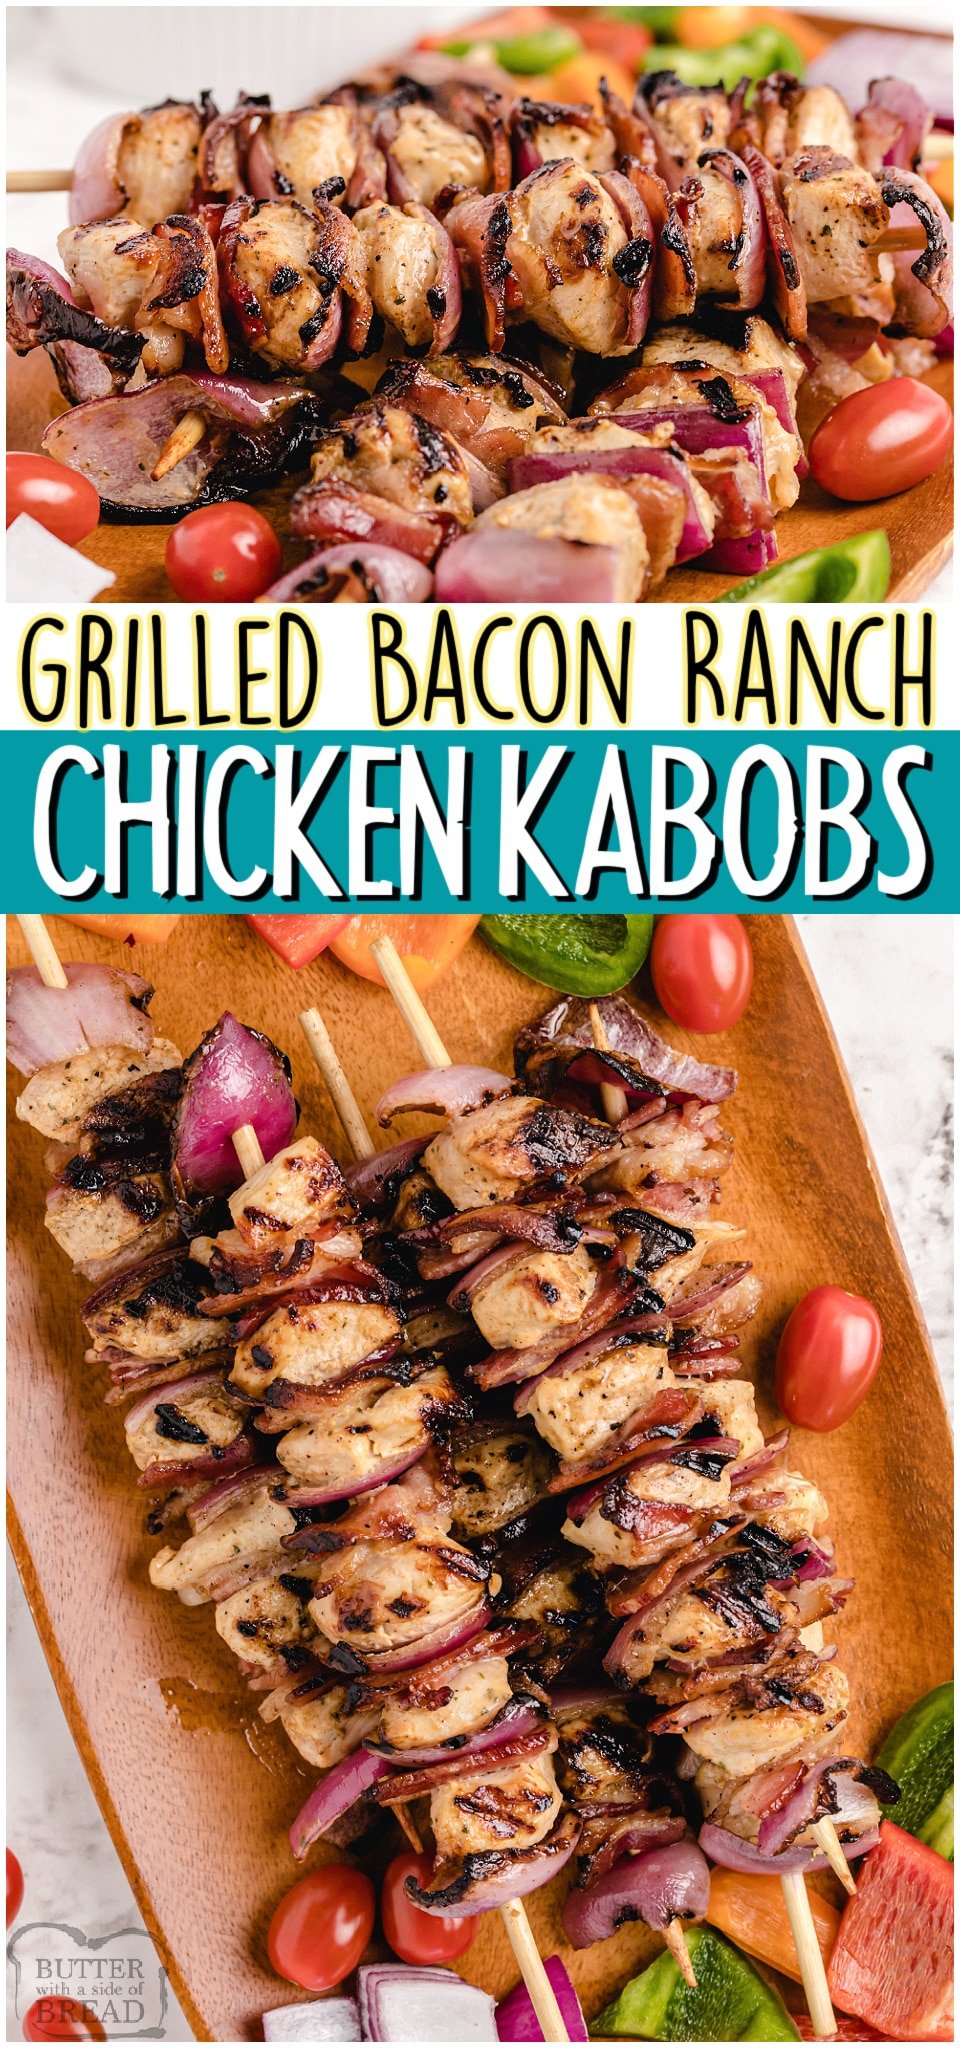 Grilled Bacon Ranch Chicken Kabobs full of flavor & so easy to make! Juicy, tender chicken skewers slathered in Ranch & layered with bacon & red onion. Crowd pleasing chicken dinner recipe perfect for your next BBQ!